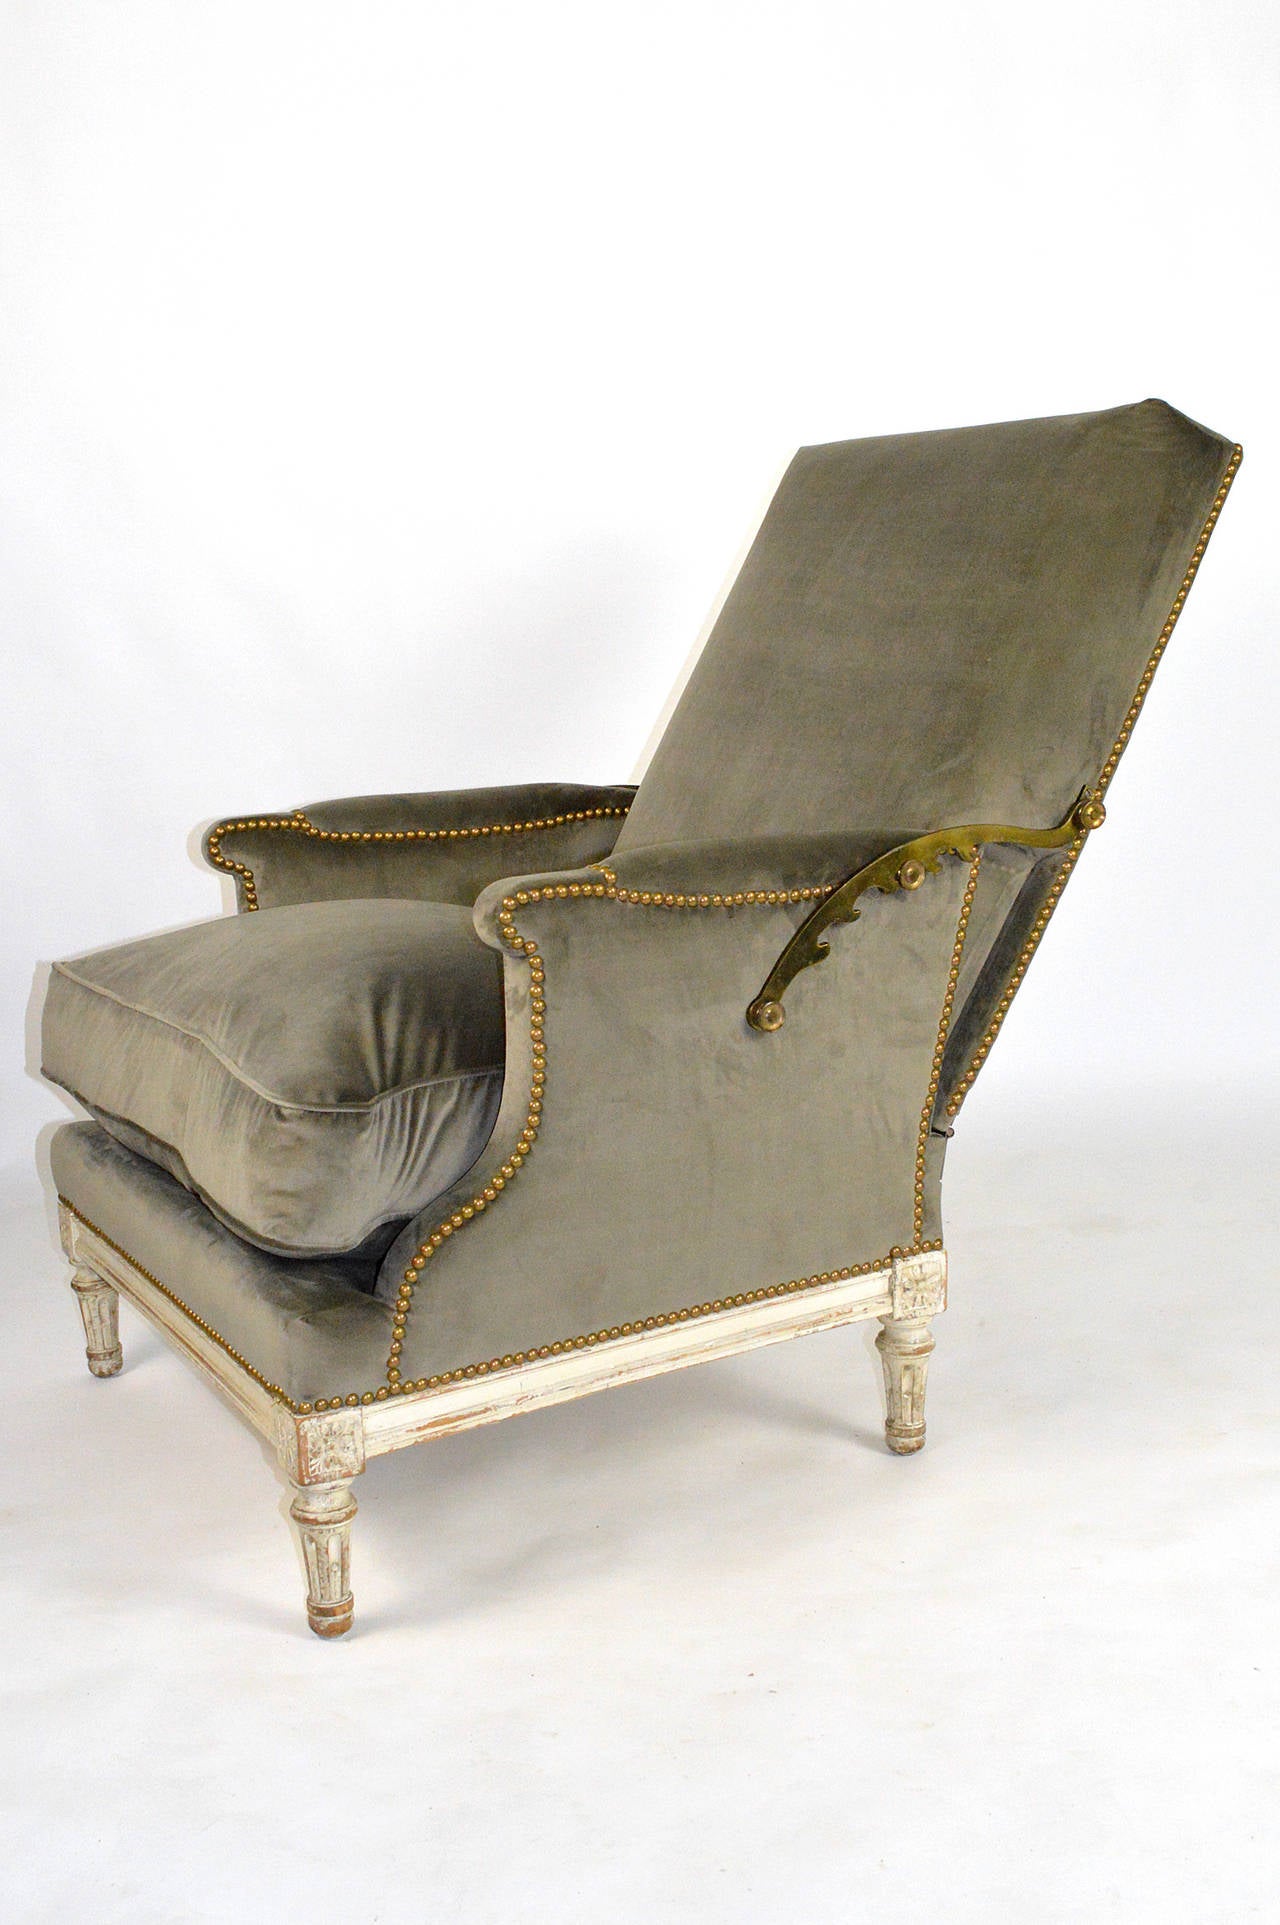 Upholstery 19th Century French Louis XVI Ratchet Reclinable Armchair For Sale